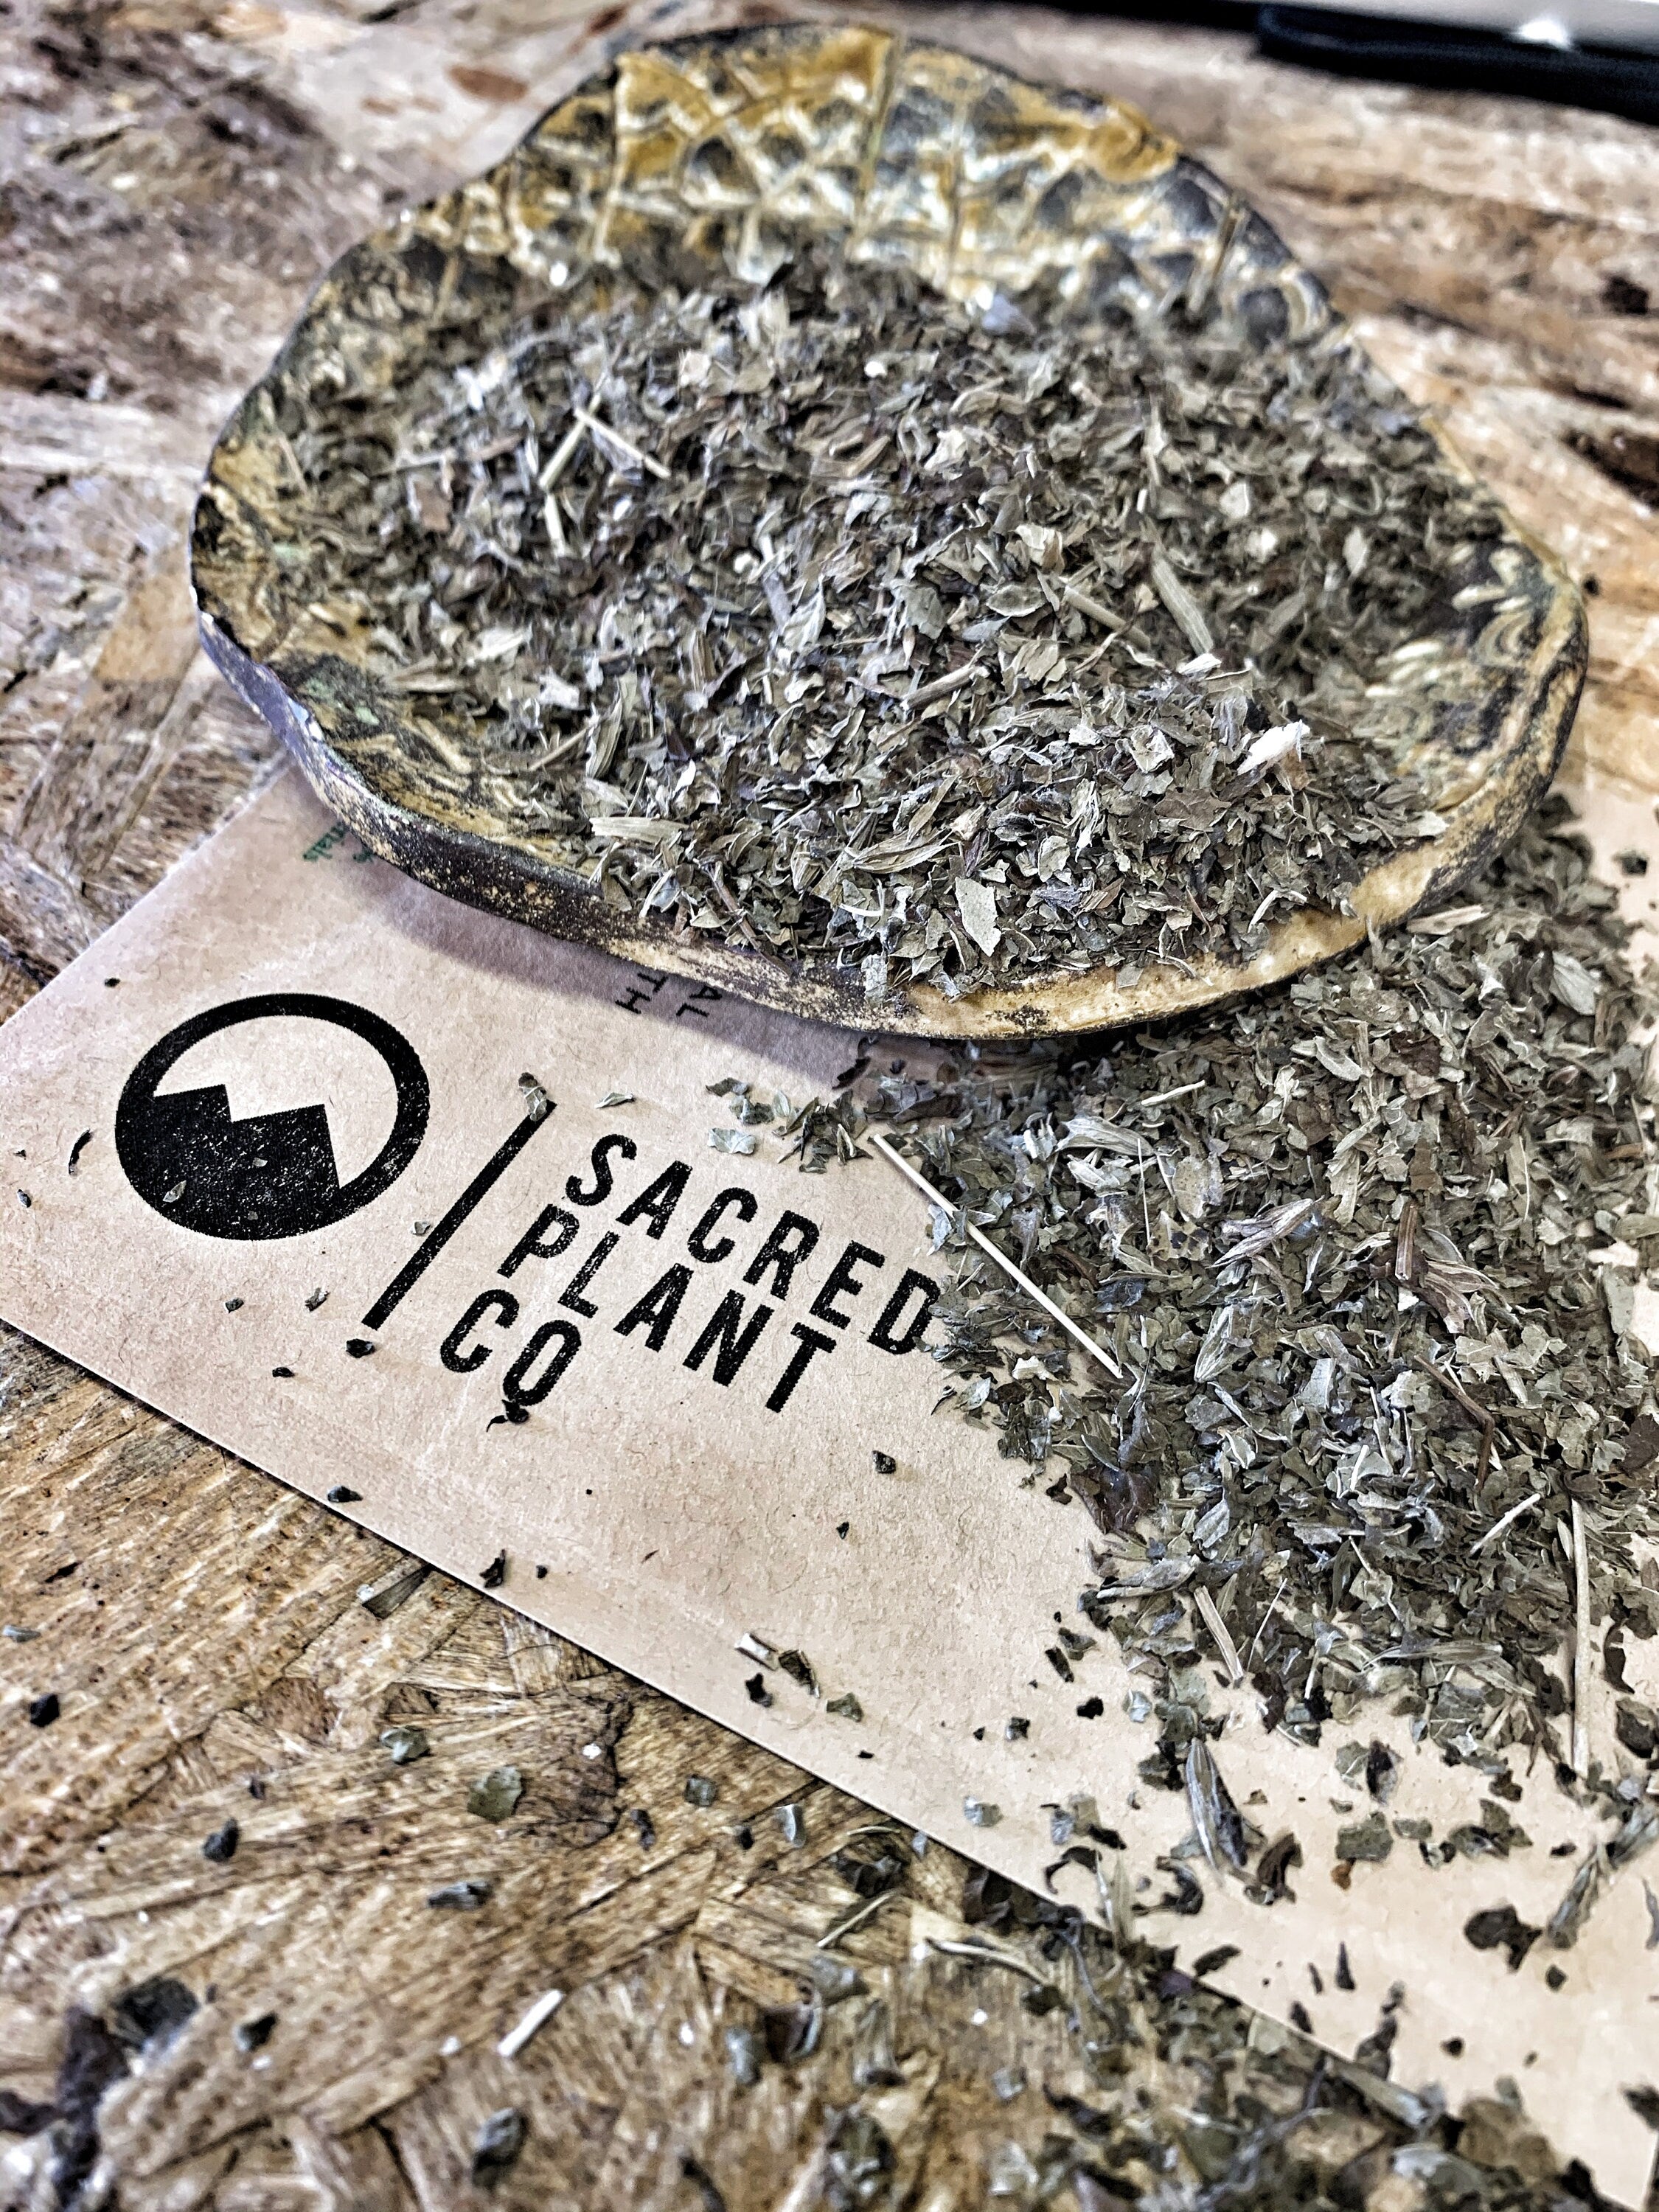 Aromatic dried lemon balm in a natural wooden dish, set on a Sacred Plant Co logo card, emphasizing the herbal freshness and sustainable packaging.